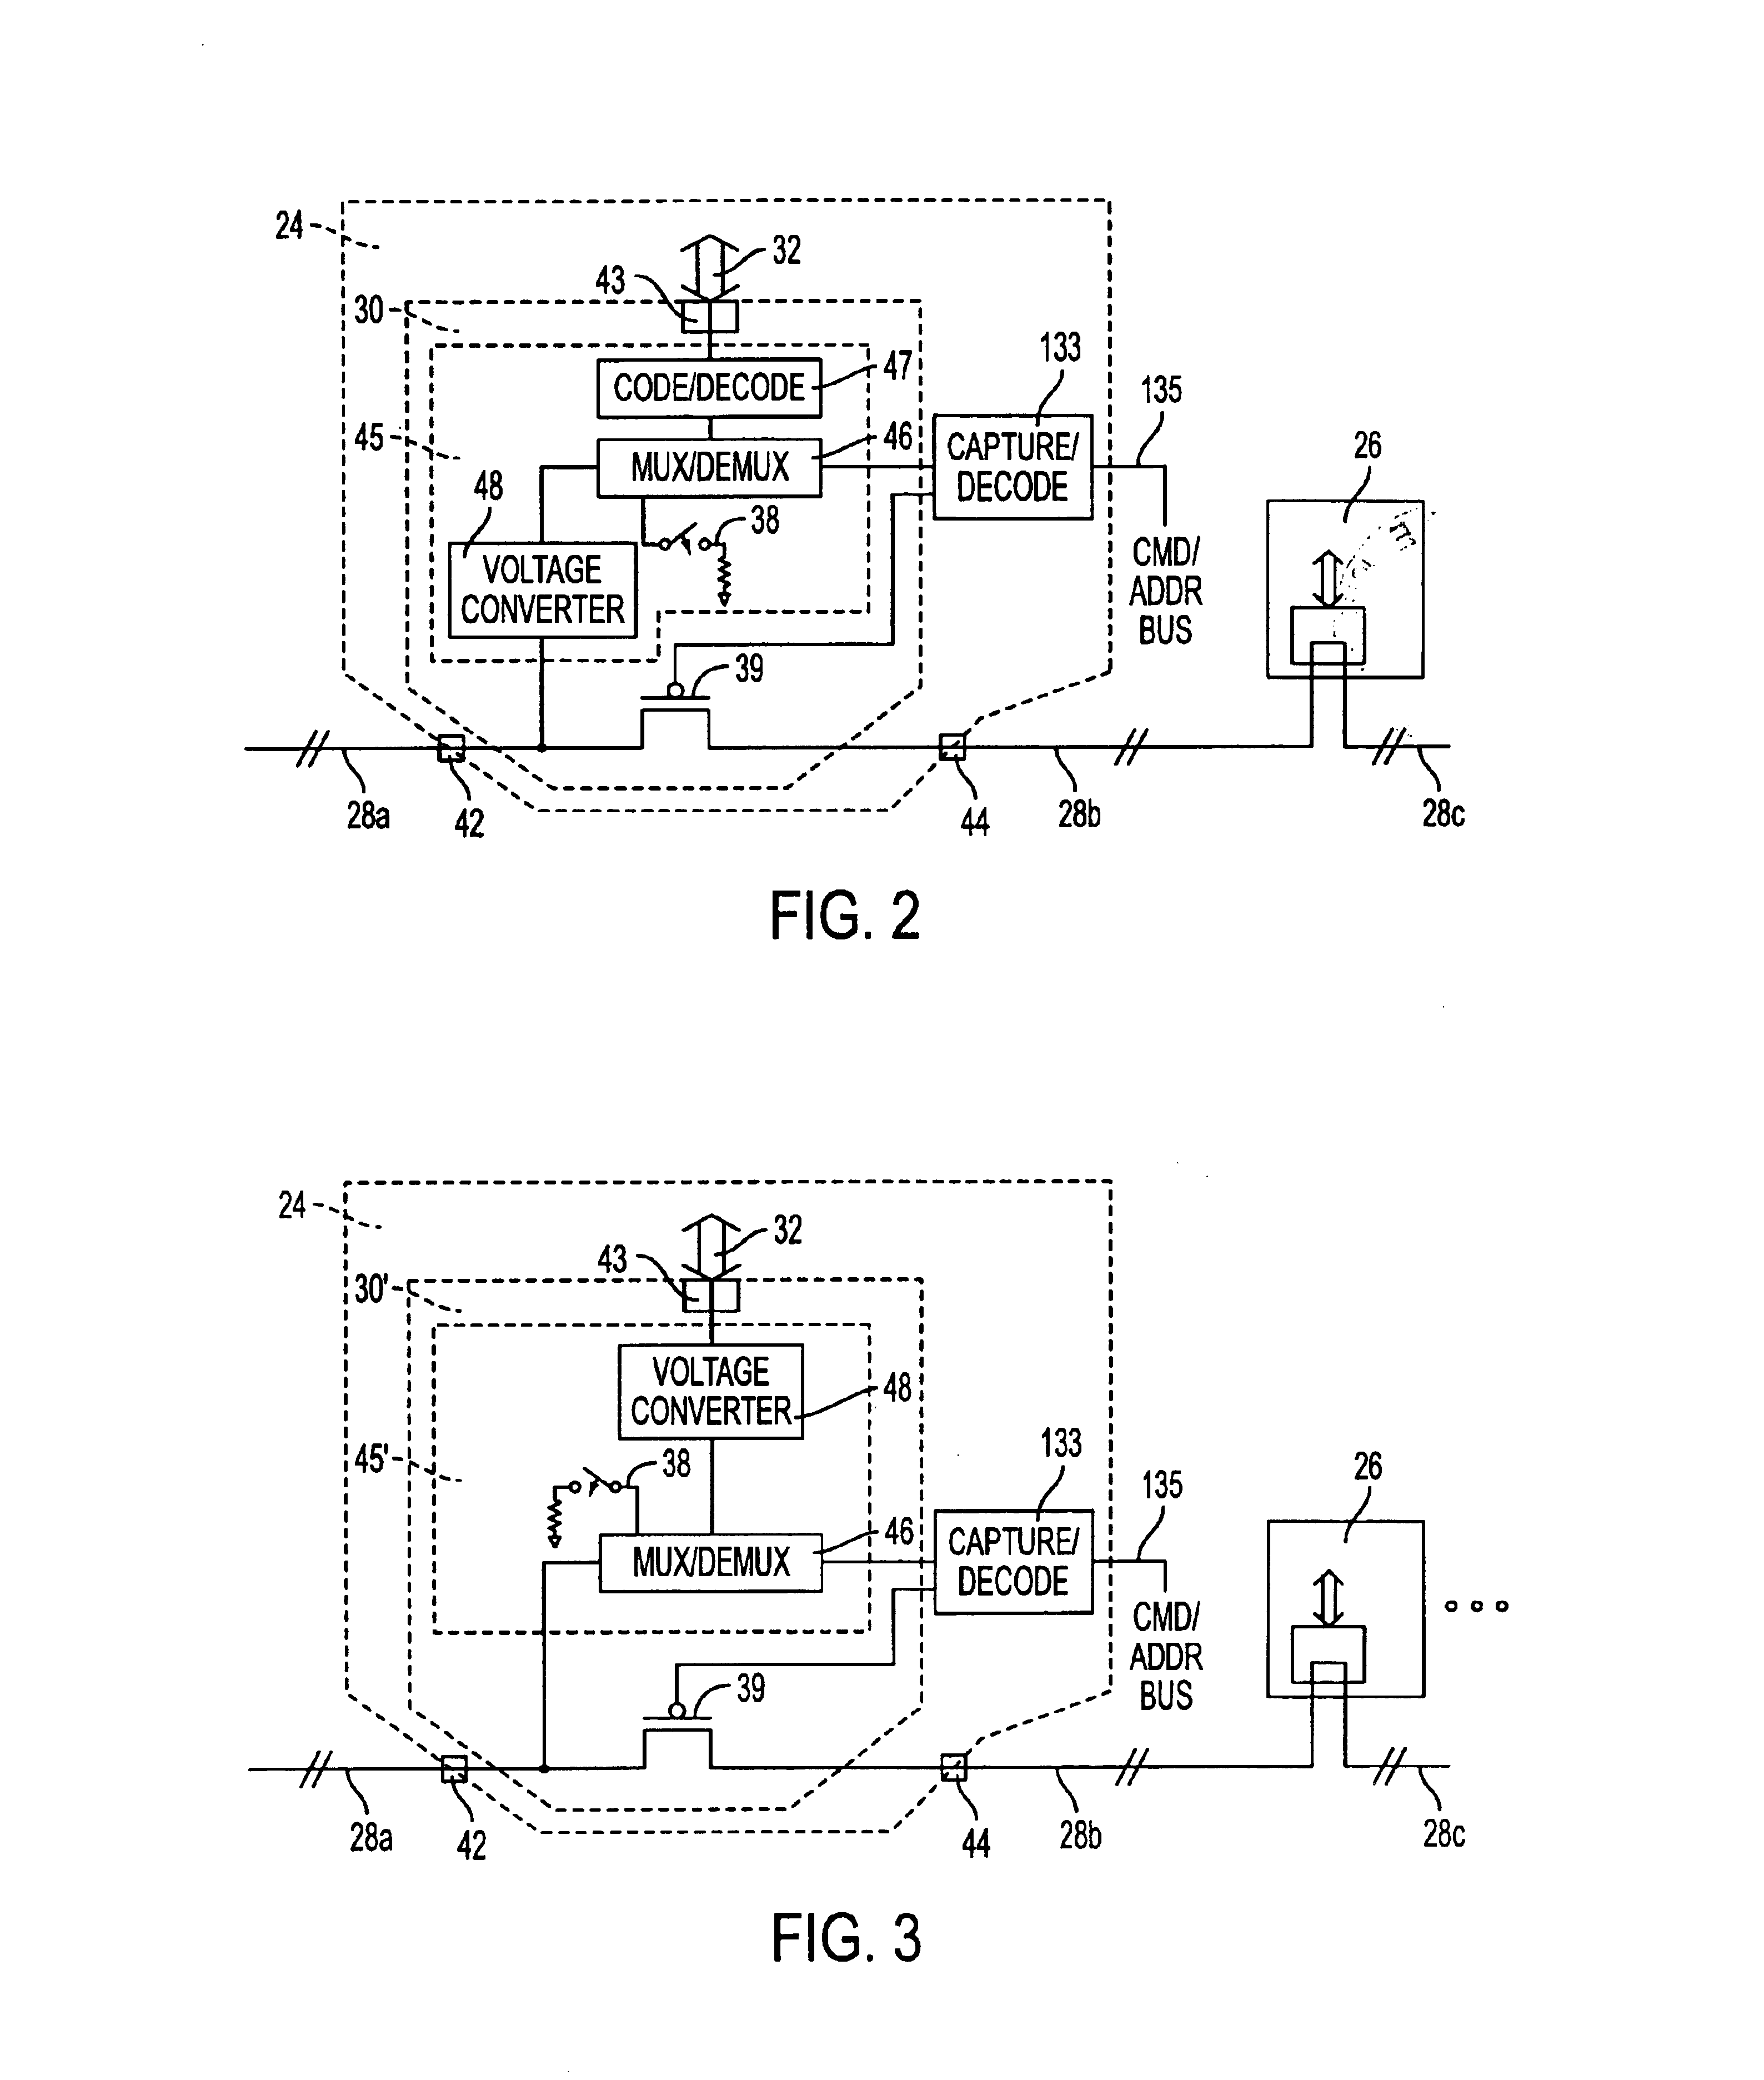 Data transmission circuit for memory subsystem, has switching circuit that selectively connects or disconnects two data bus segments to respectively enable data transmission or I/O circuit connection